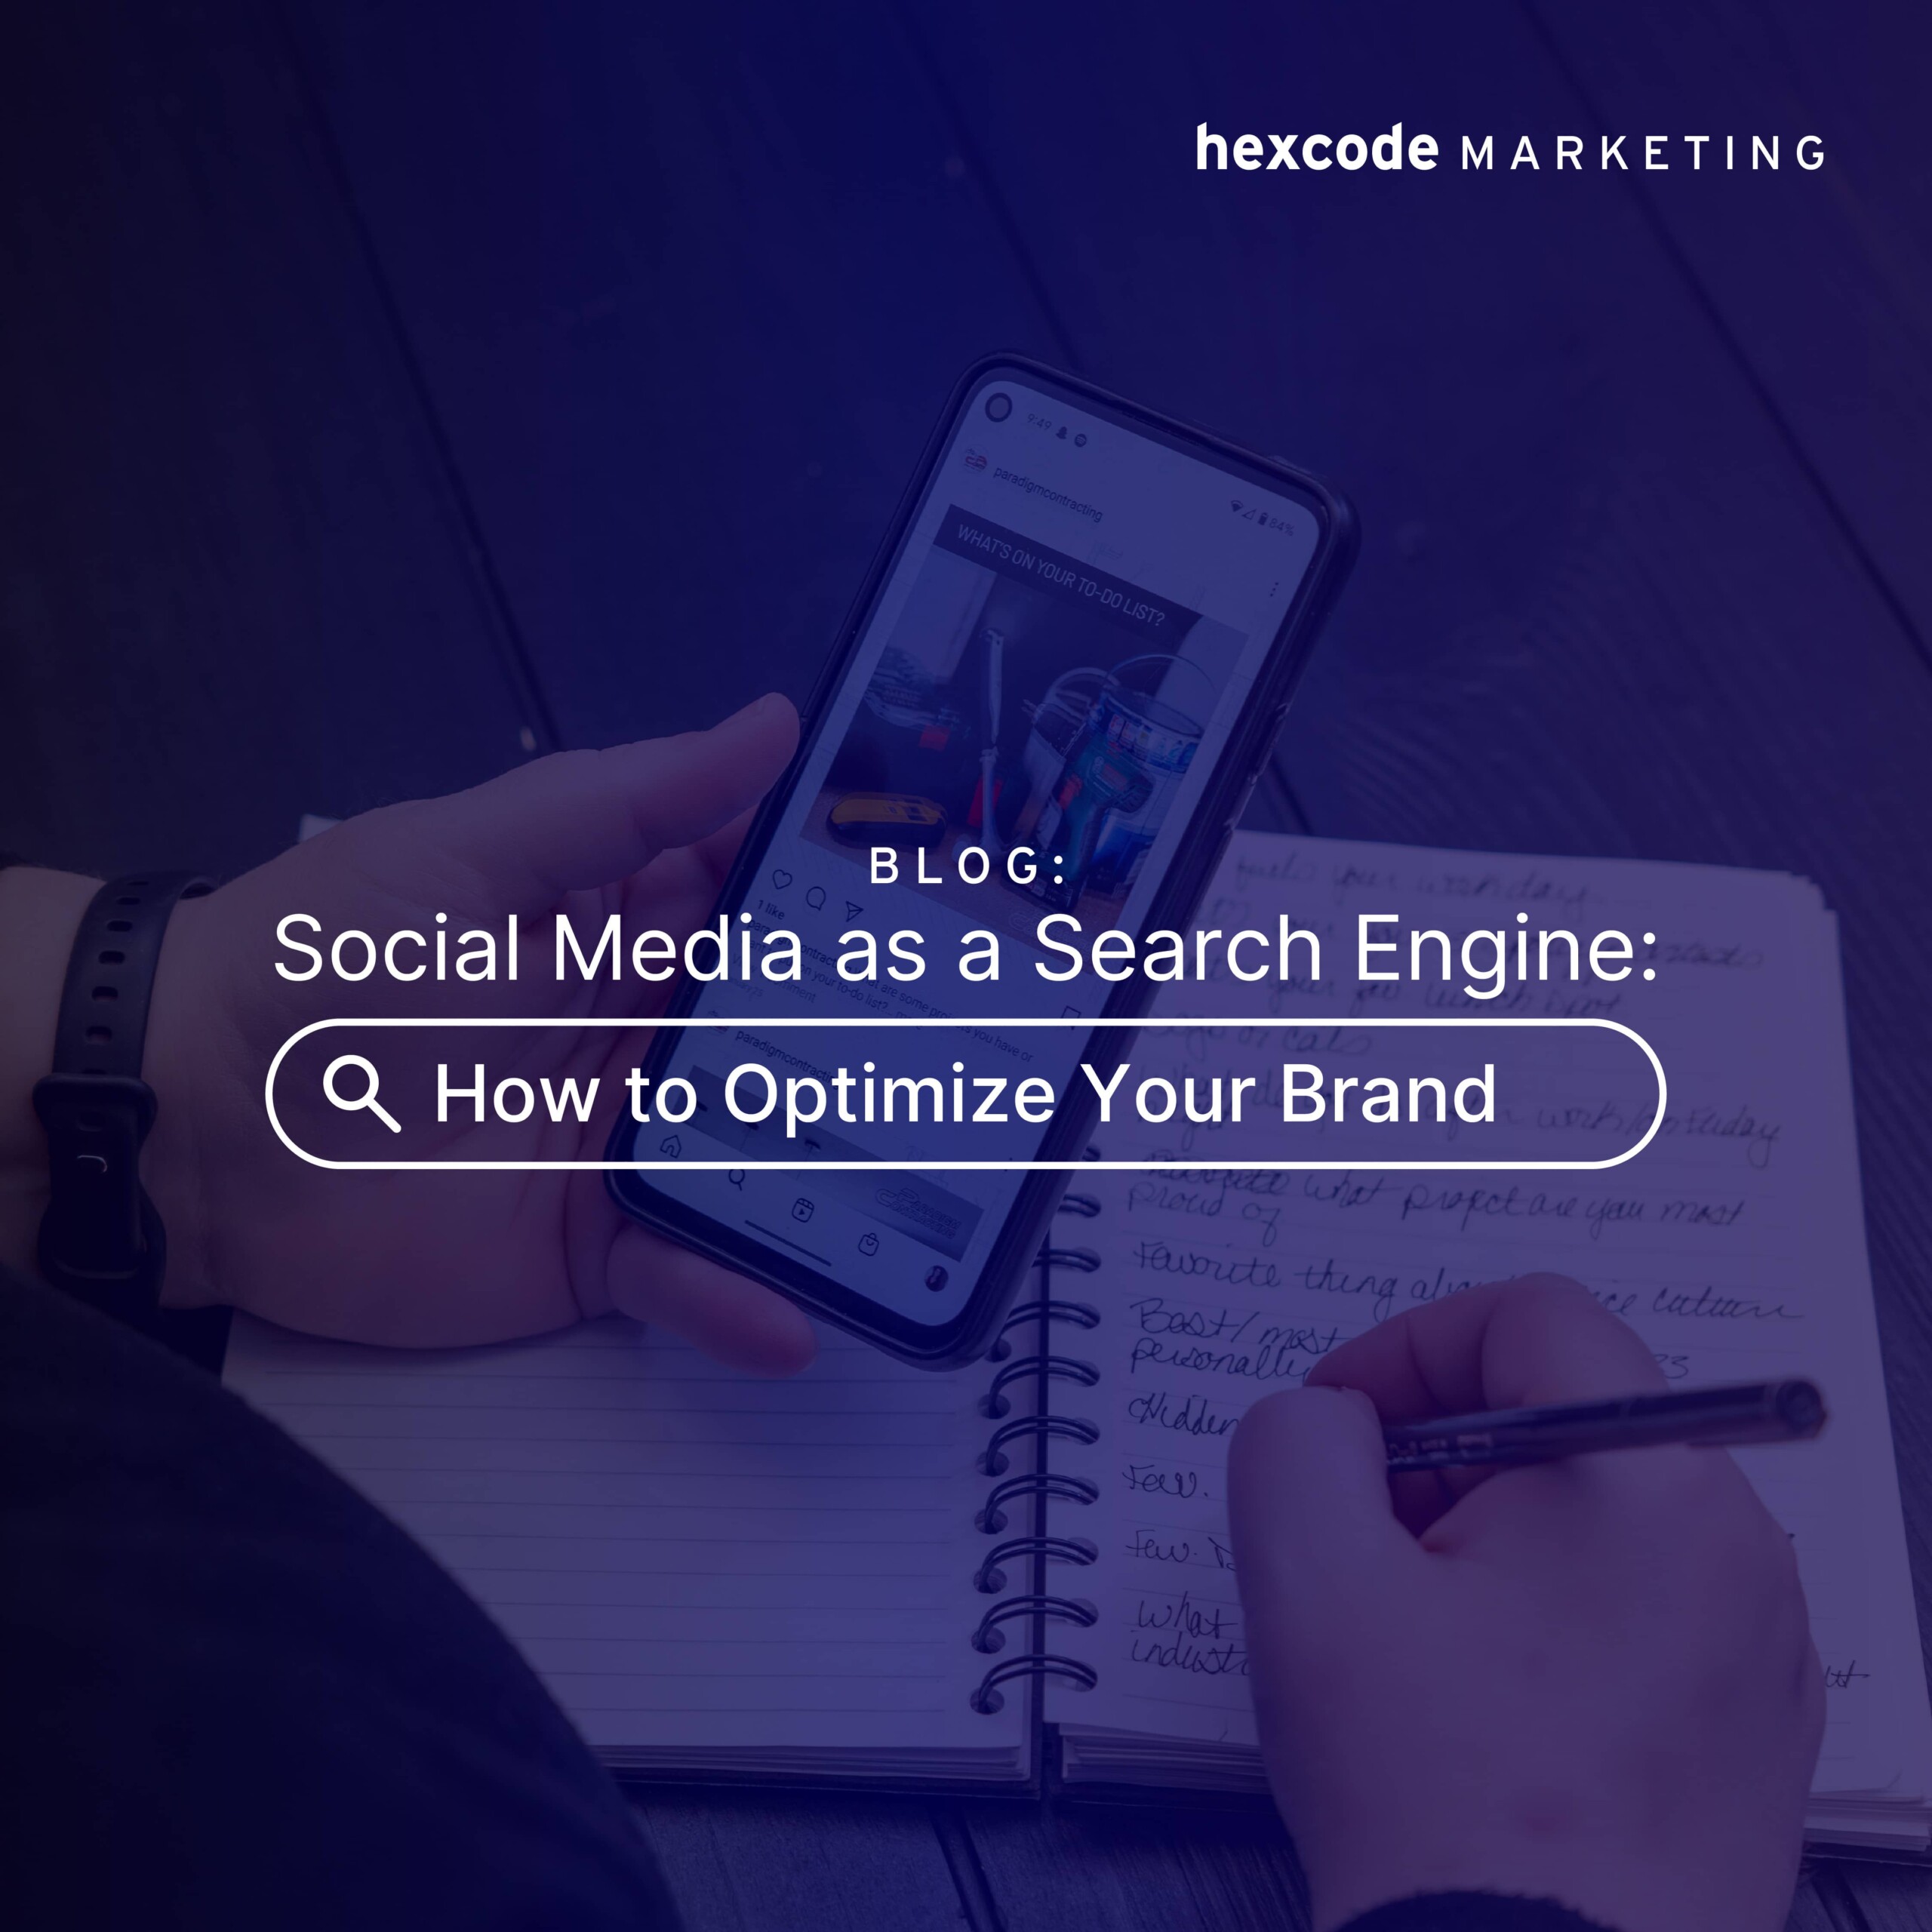 Social Media as a Search Engine: How to Optimize Your Brand